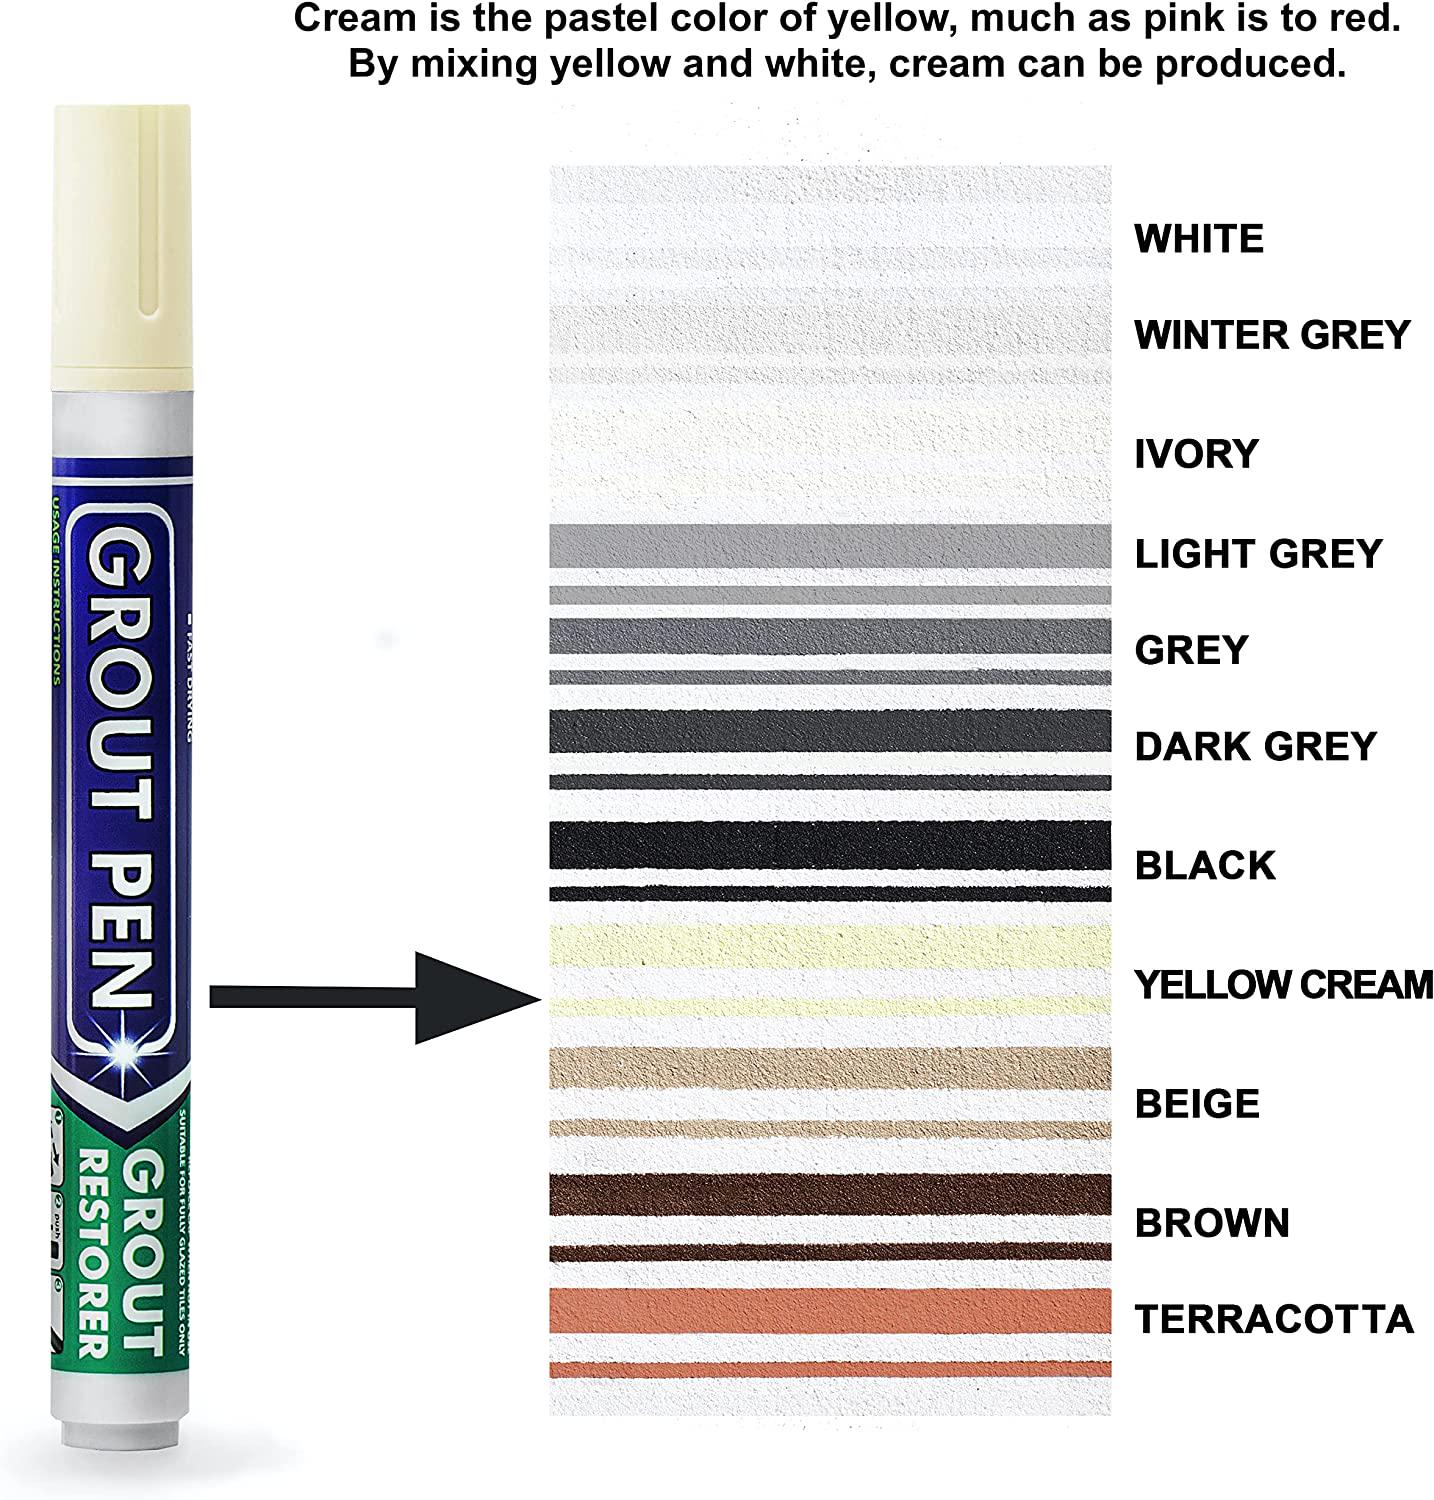 RAINBOW CHALK MARKERS LTD, Grout Pen - Designed for Restoring Tile Grout in bathrooms and Kitchens (Cream)